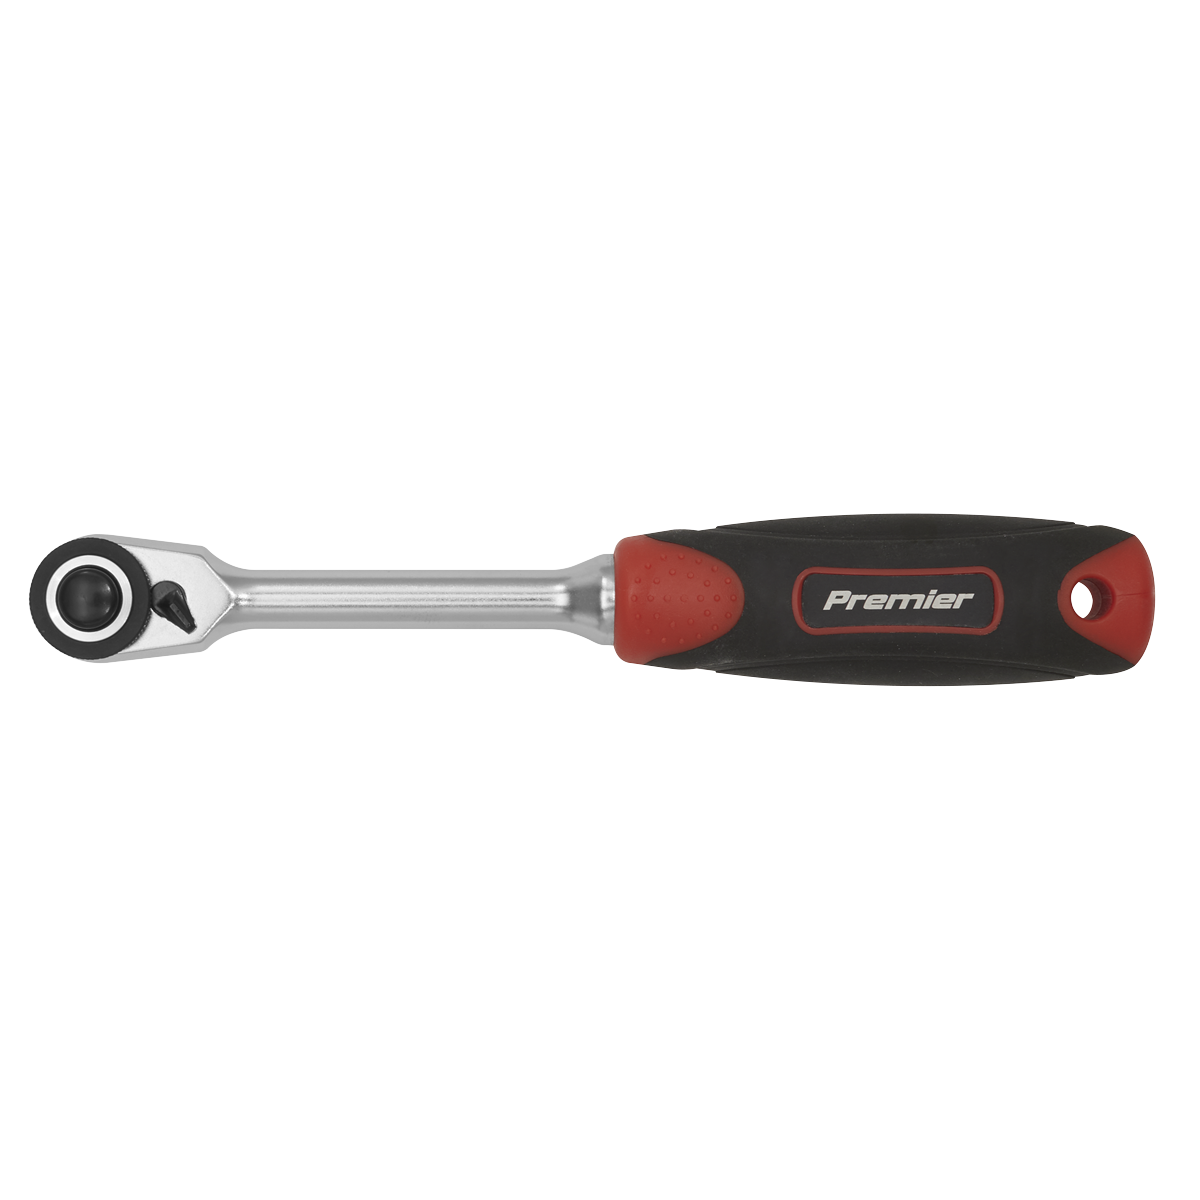 Sealey 1/4"Sq Drive Compact Head Ratchet Wrench - Platinum Series AK8987